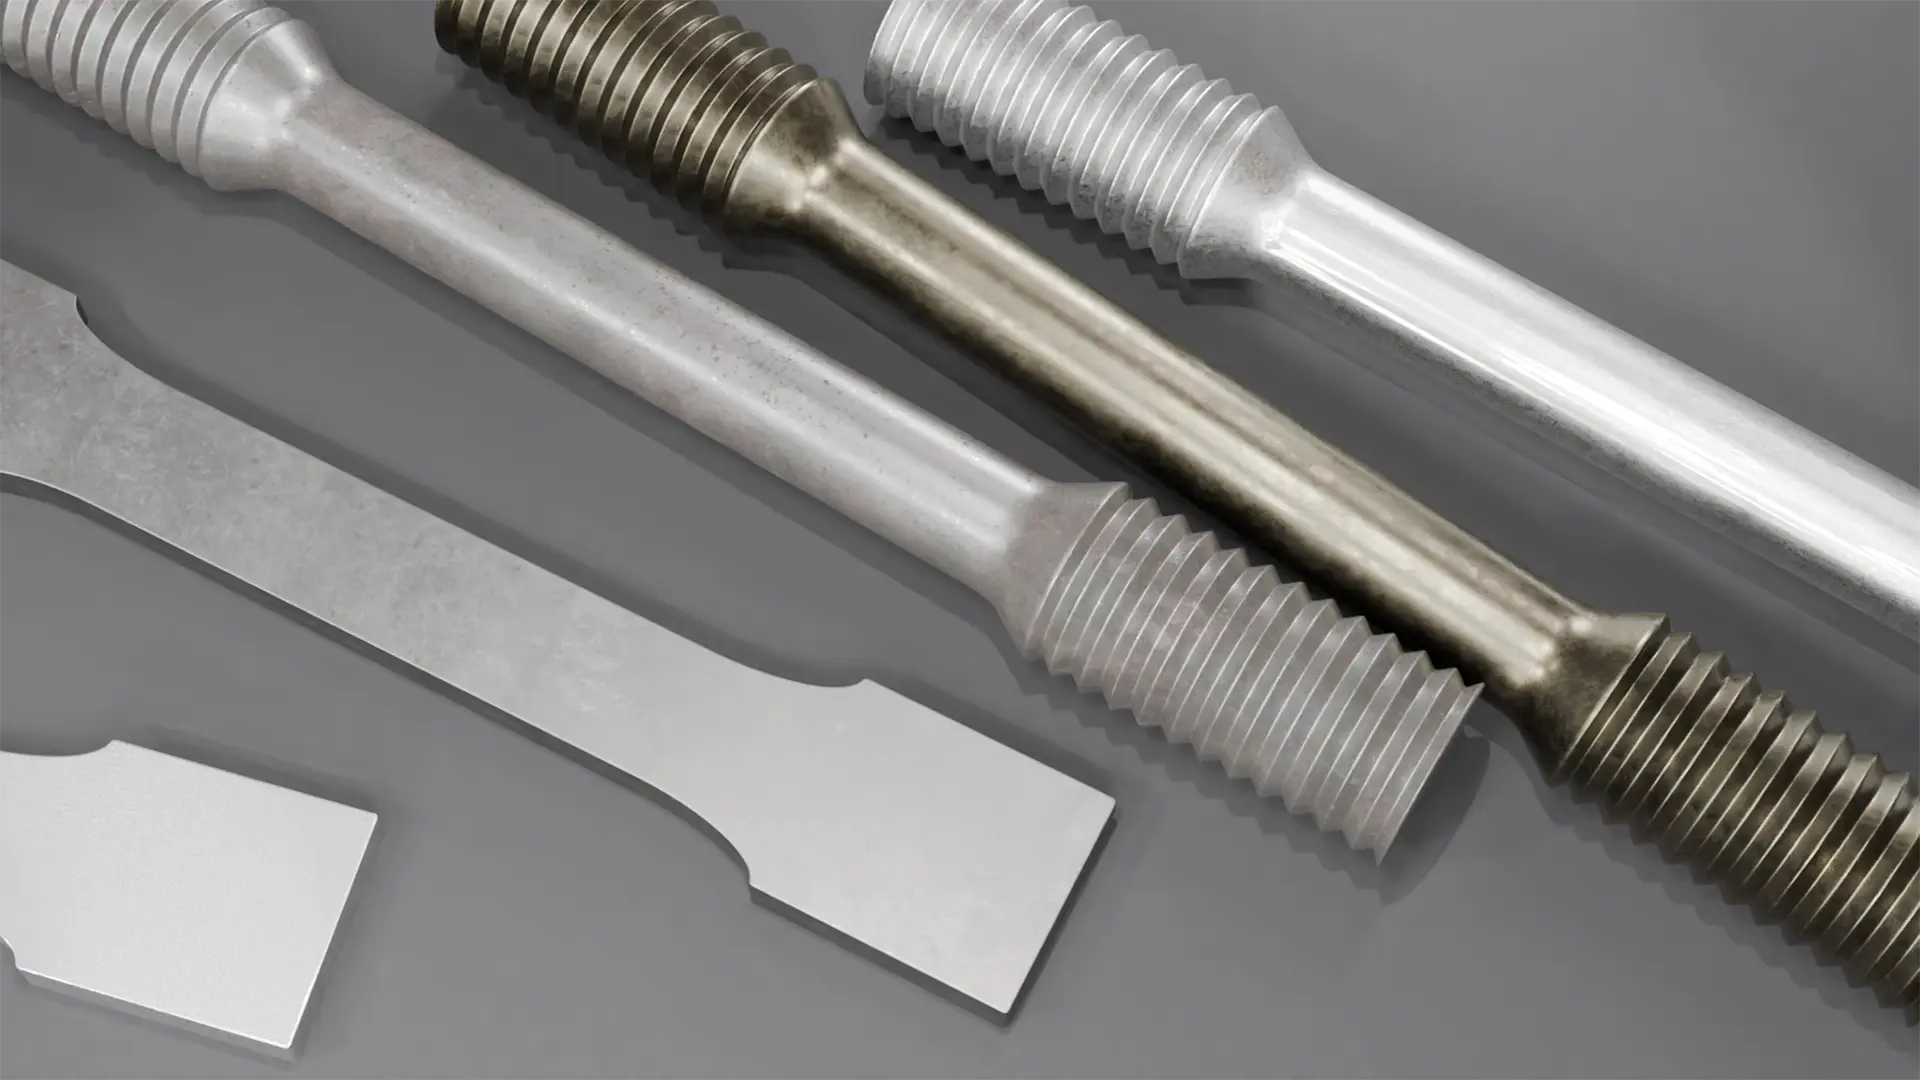 Advantages of CNC End Mills in Precision Sample Preparation